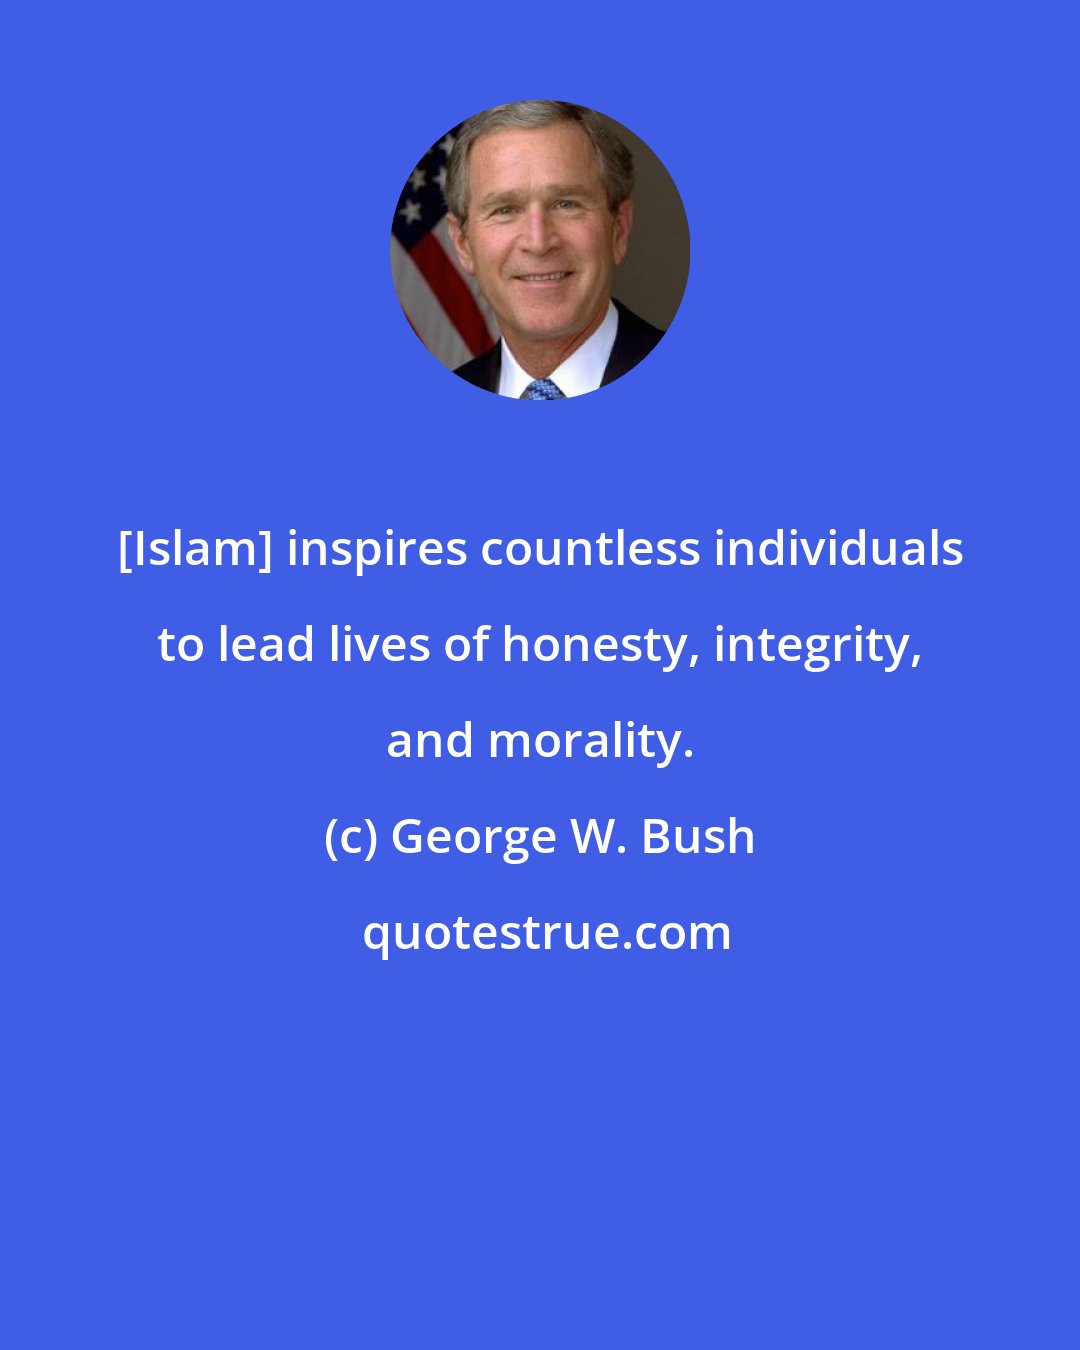 George W. Bush: [Islam] inspires countless individuals to lead lives of honesty, integrity, and morality.